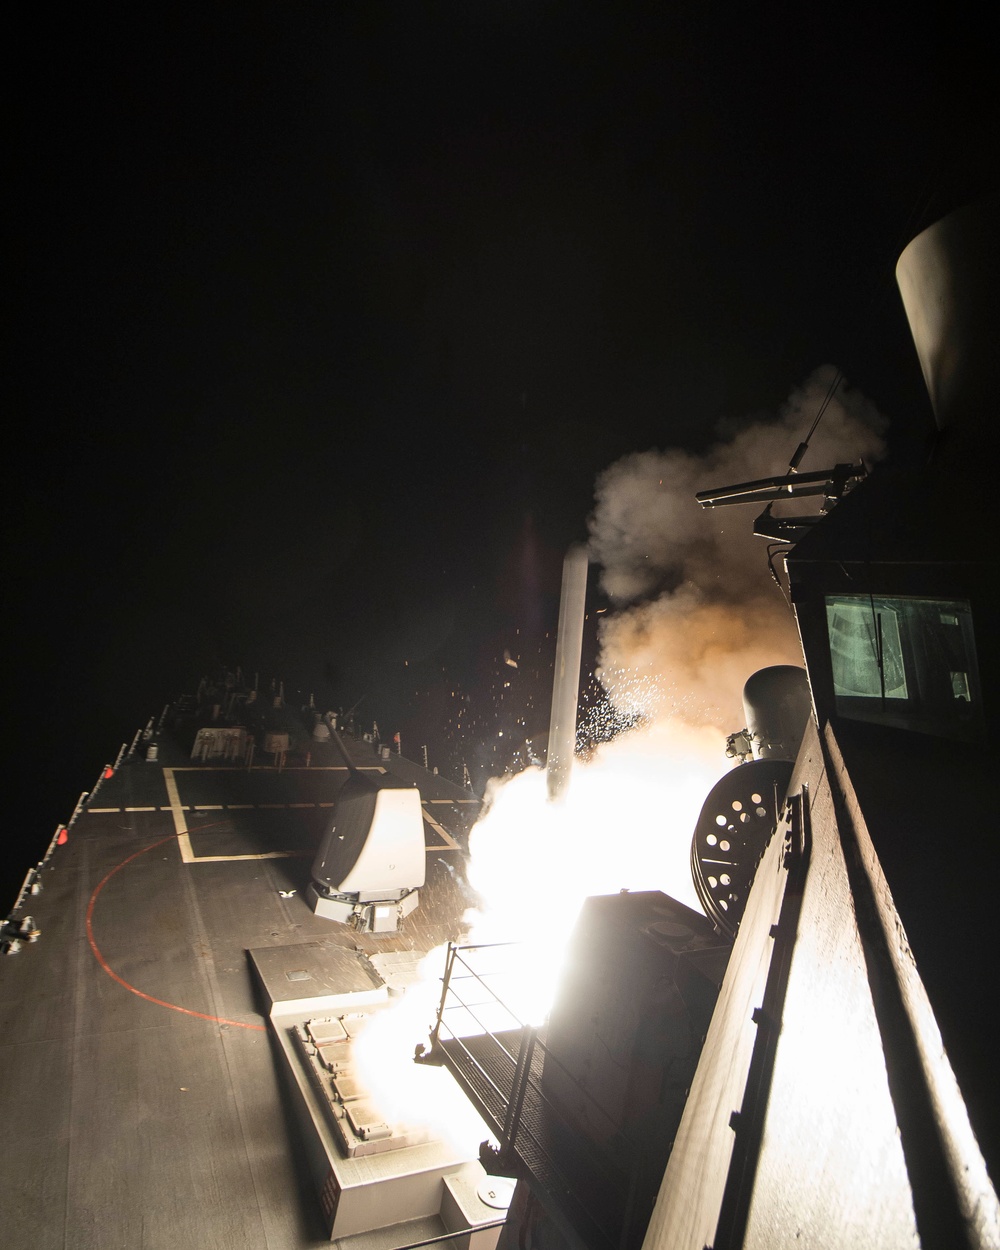 USS Ross (DDG 71) fires a tomahawk land attack missile